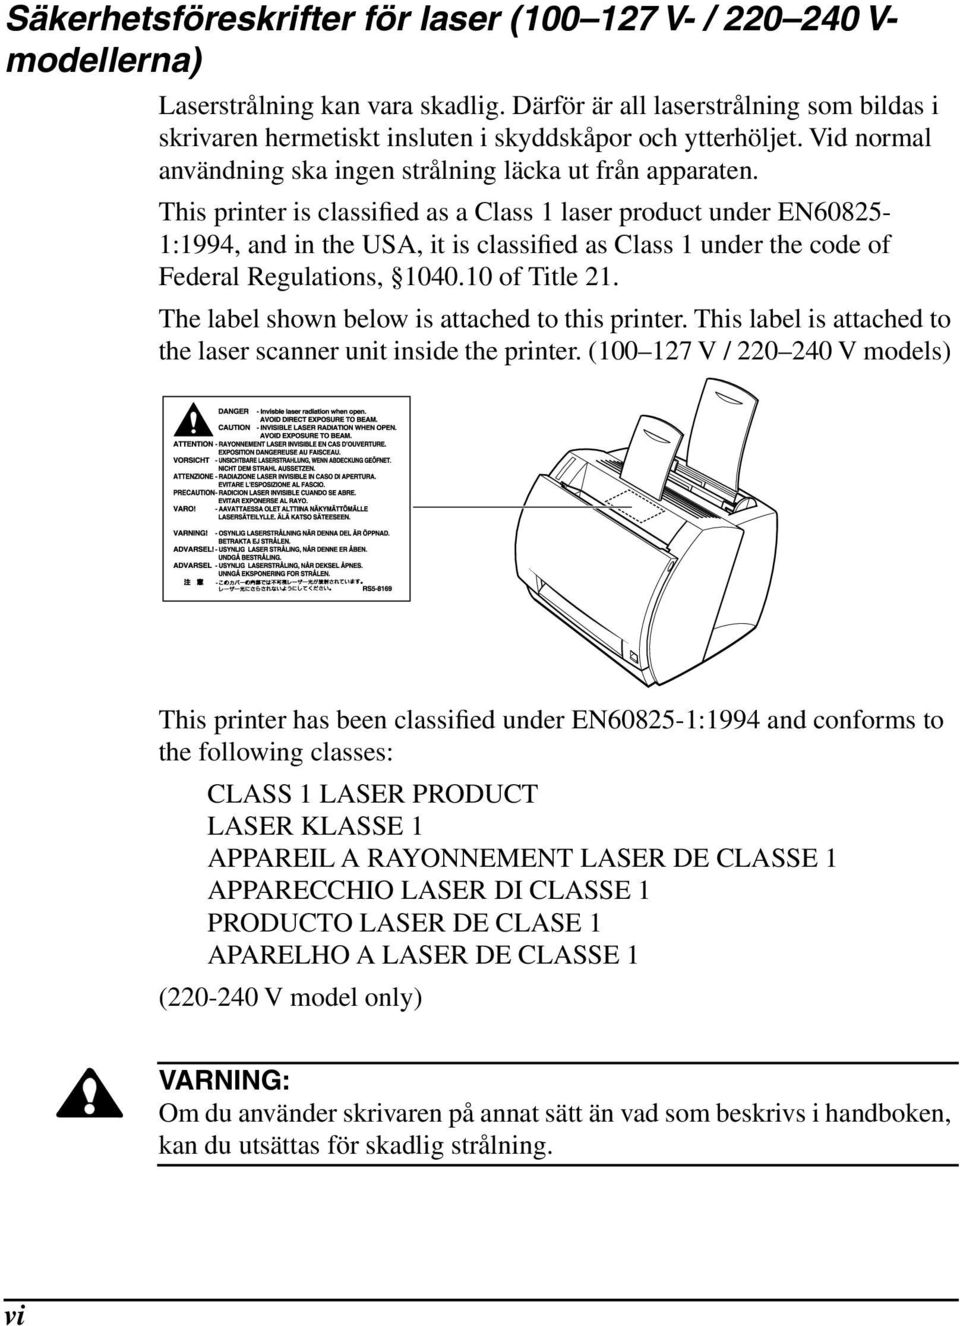 This printer is classified as a Class 1 laser product under EN60825-1:1994, and in the USA, it is classified as Class 1 under the code of Federal Regulations, 1040.10 of Title 21.